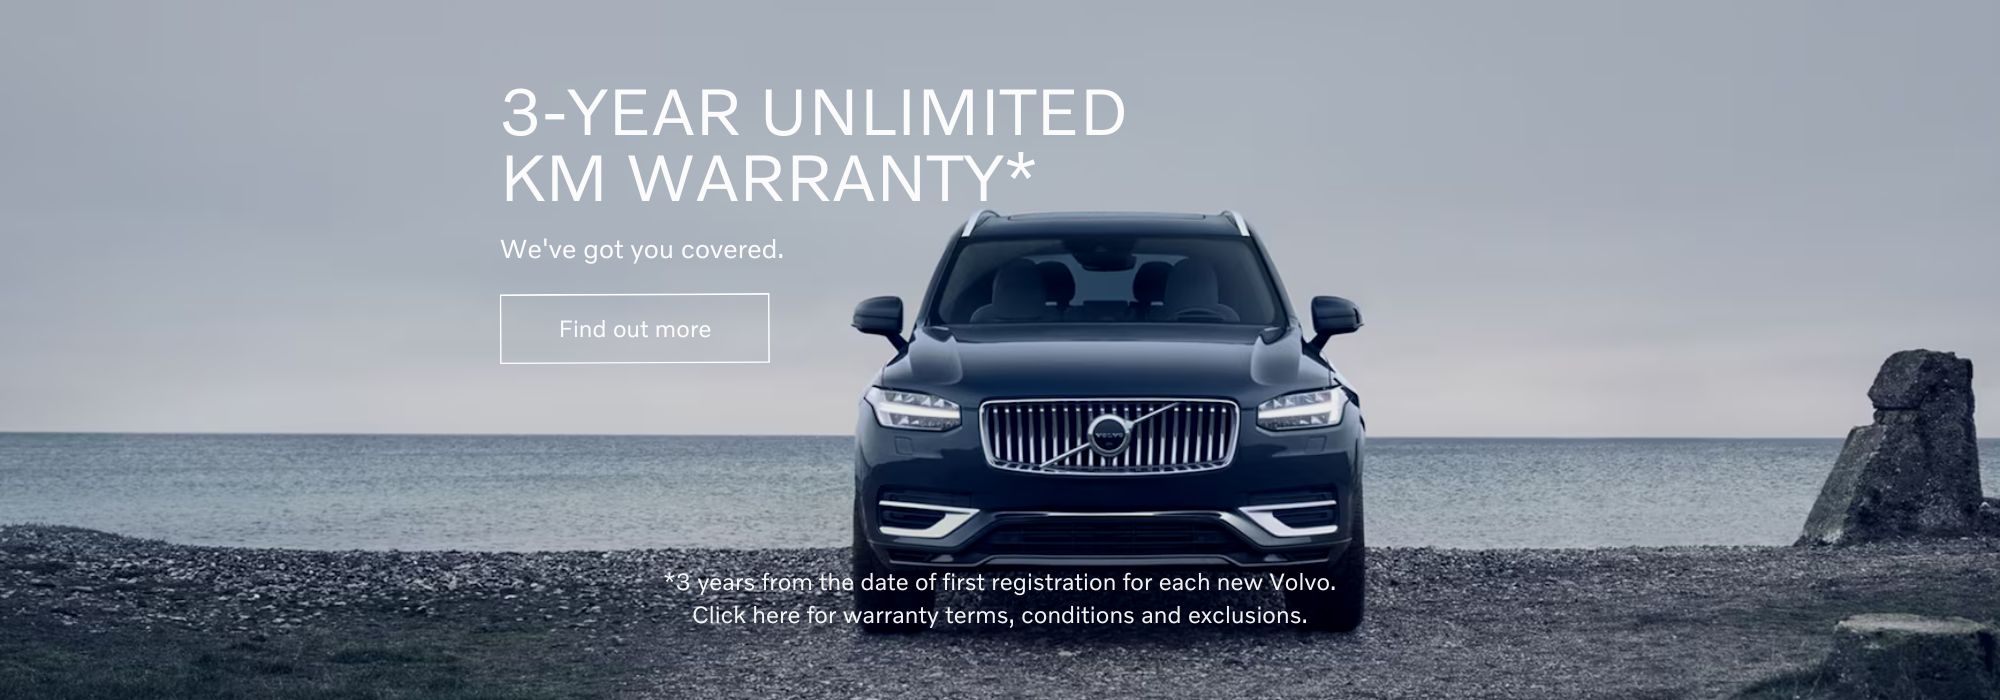 3-YEAR UNLIMITED KM WARRANTY*. We've got you covered. 